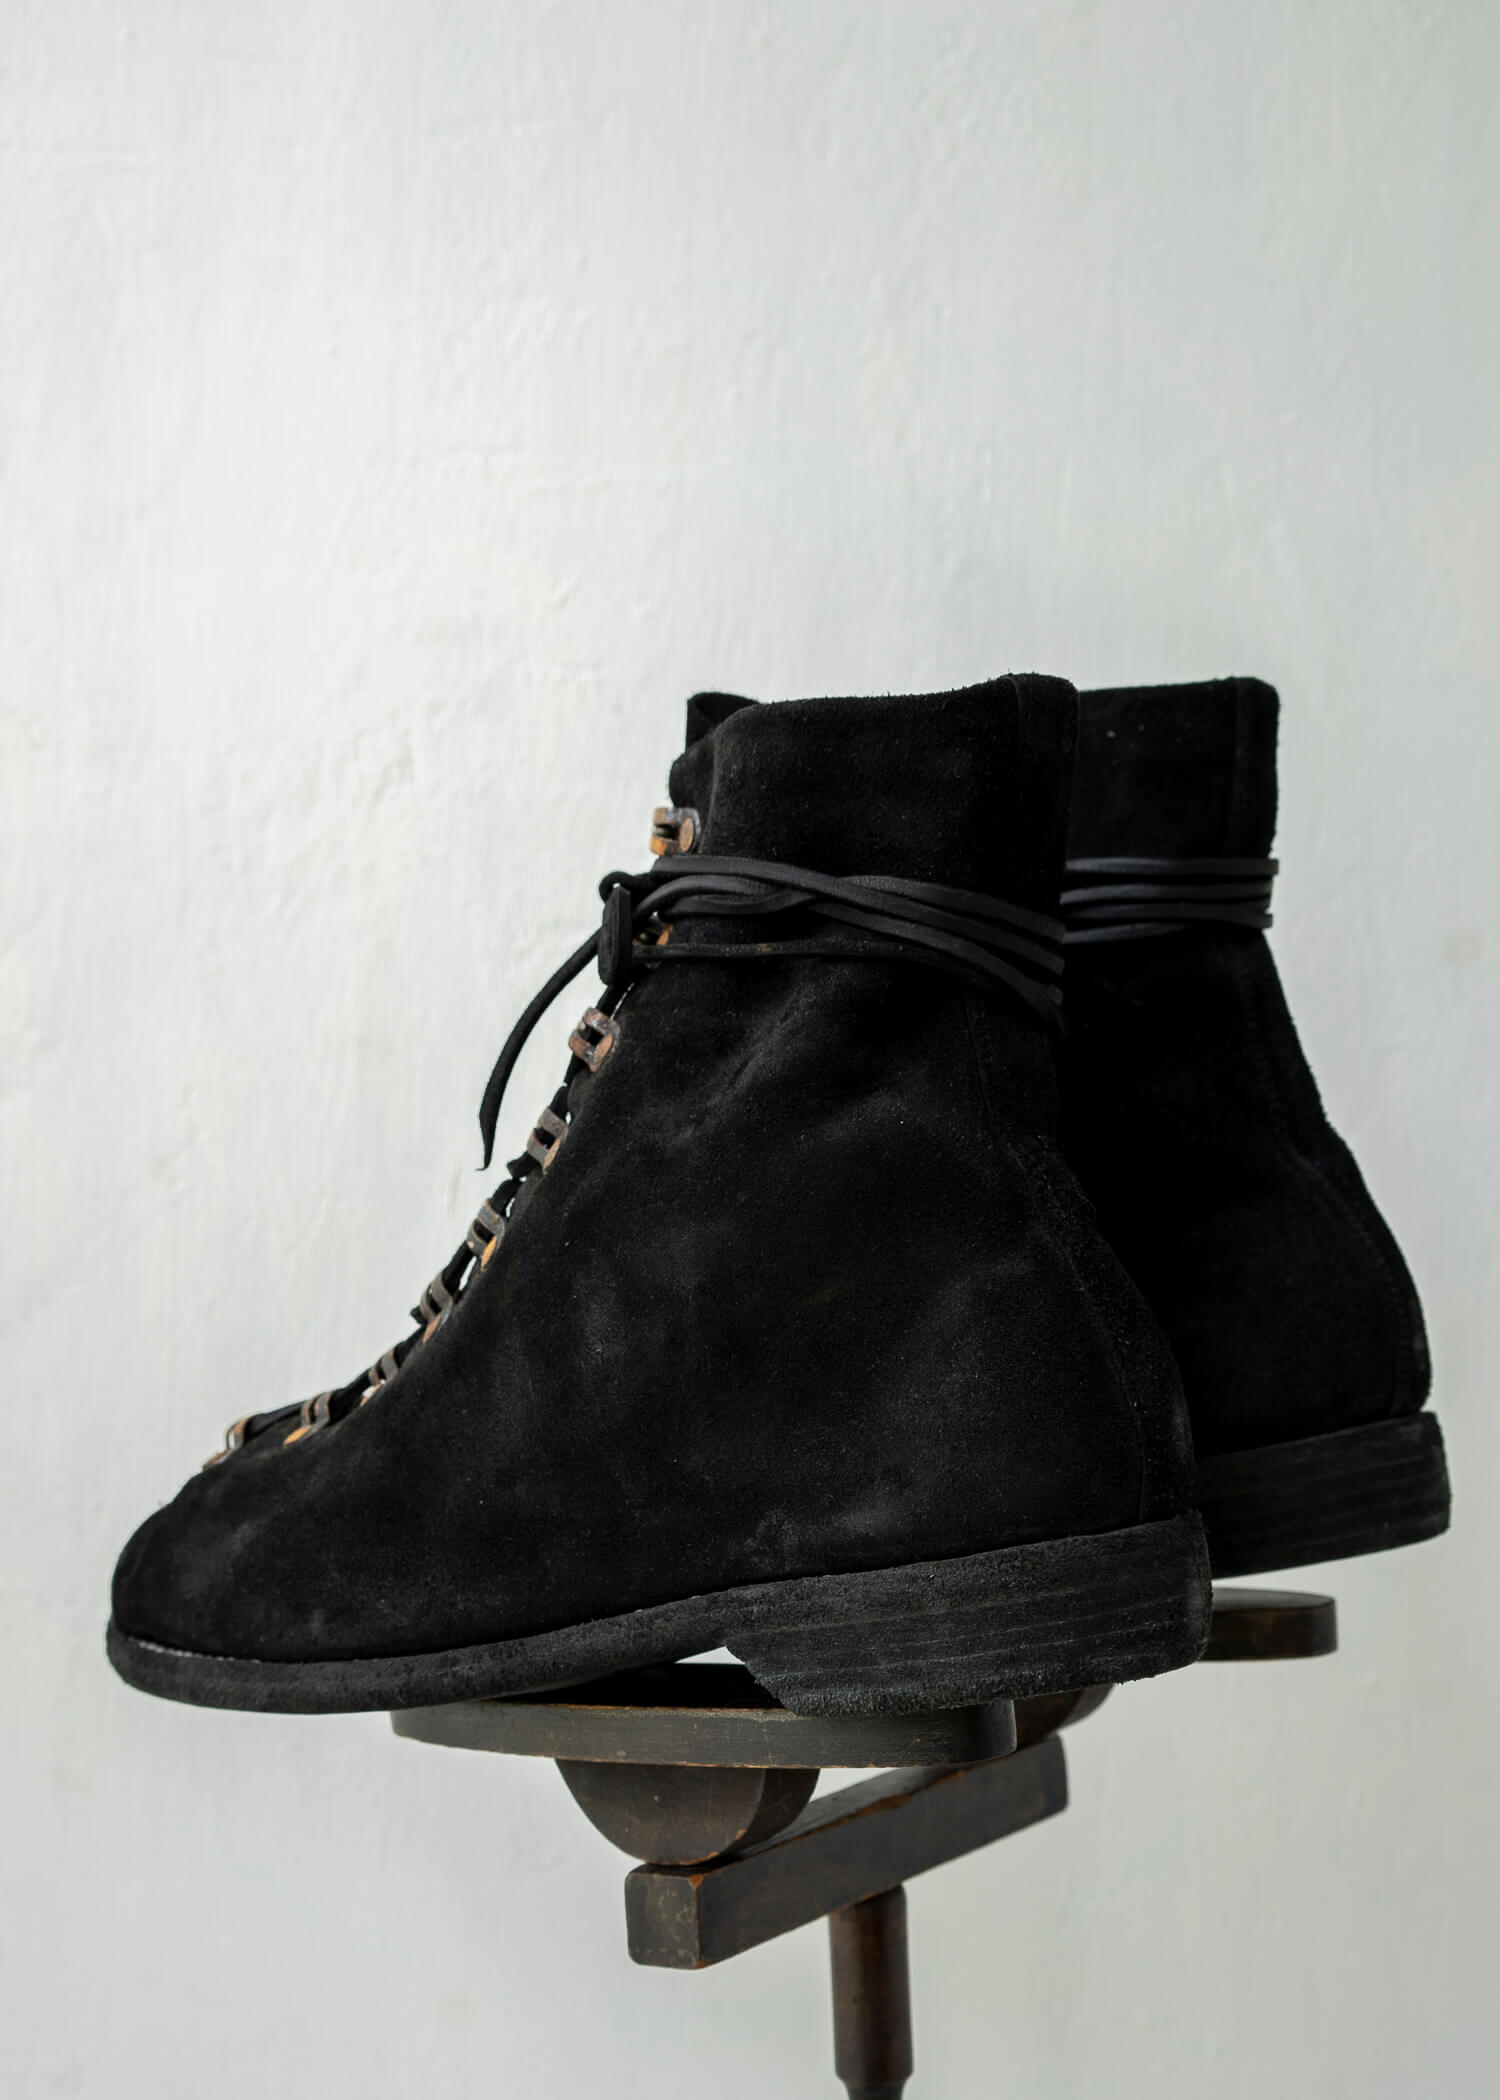 GUIDI / "205" CARF REVERS NEW HIKING / SOLE LEATHER / CARF FULL GRAIN / BLKT